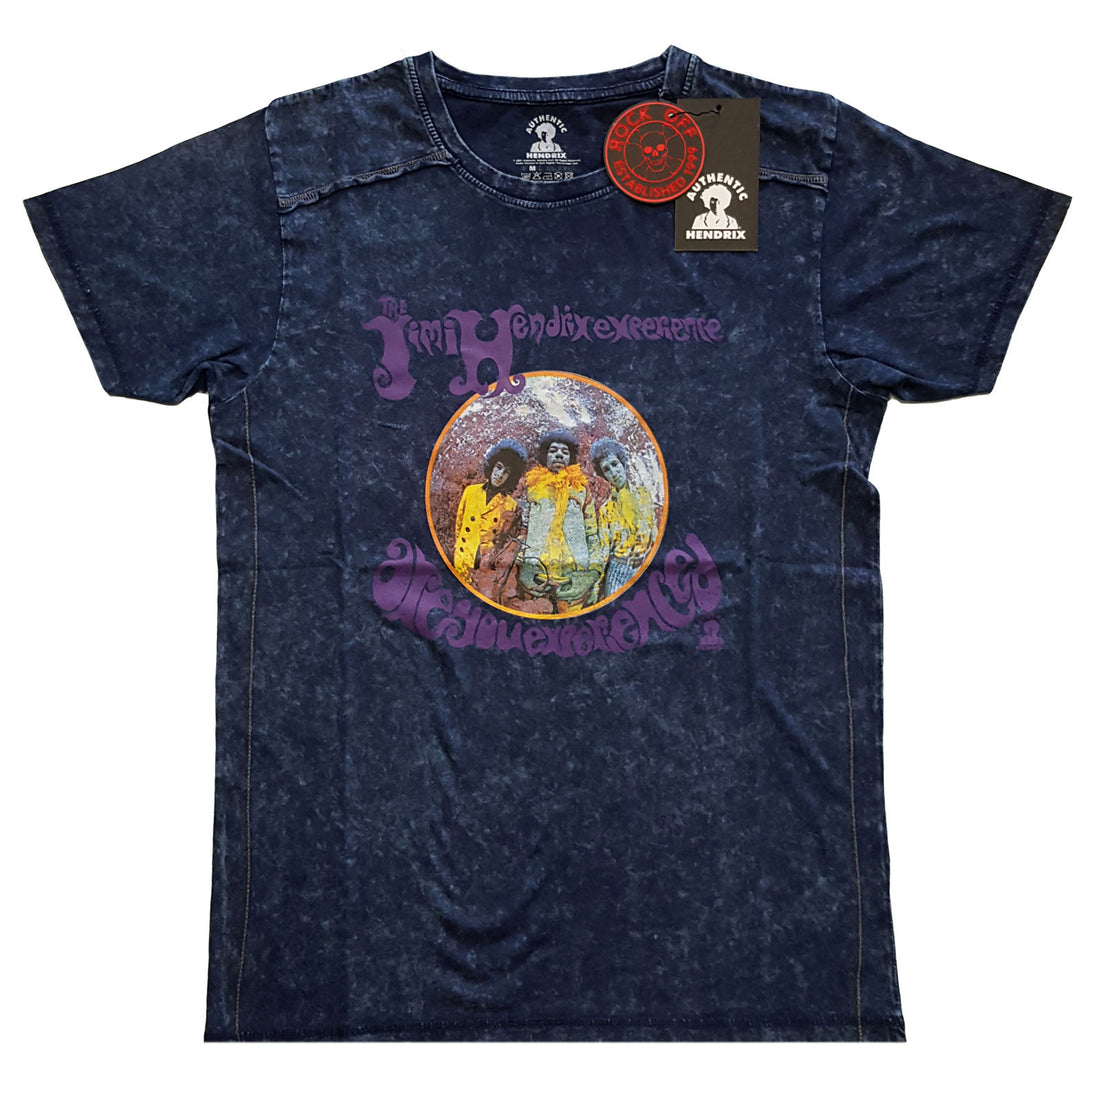 Jimi Hendrix Unisex T-Shirt: Experienced (Wash Collection)